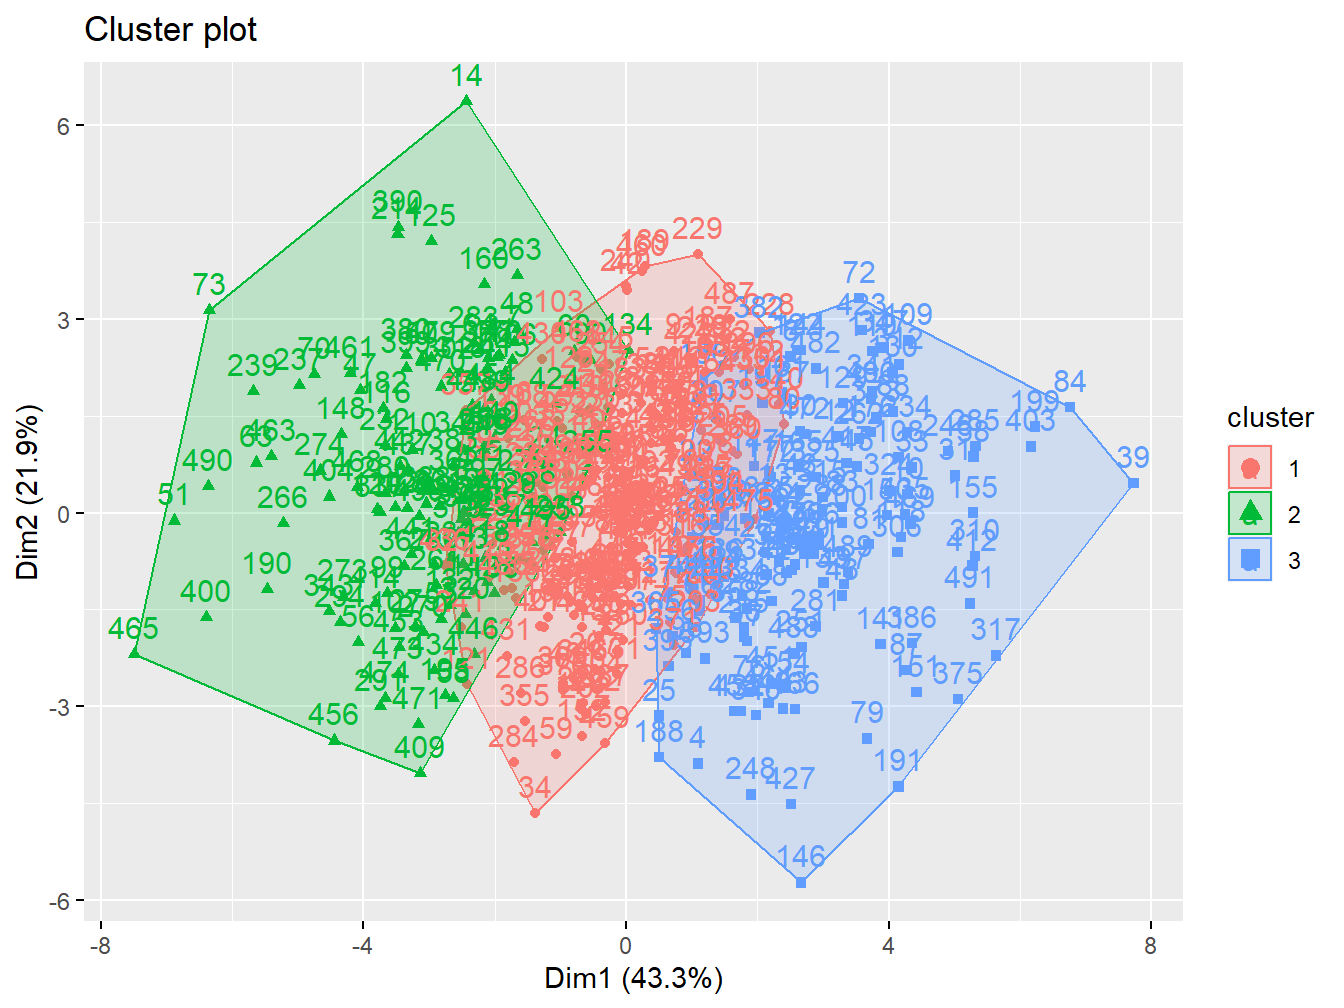 Cluster analysis with 3 groups in the simulated data